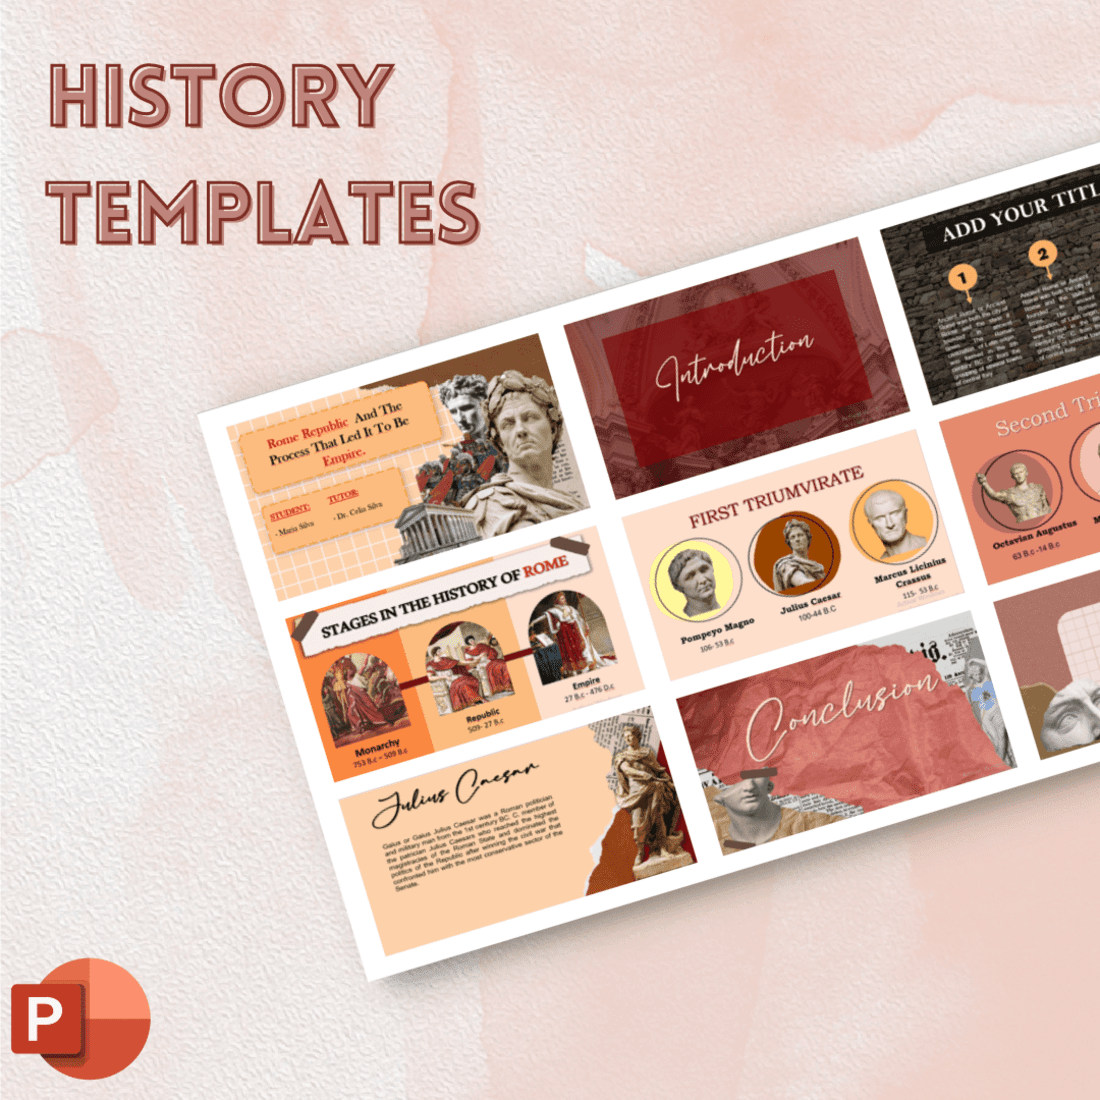 History Templates- Ancient Rome cover image.